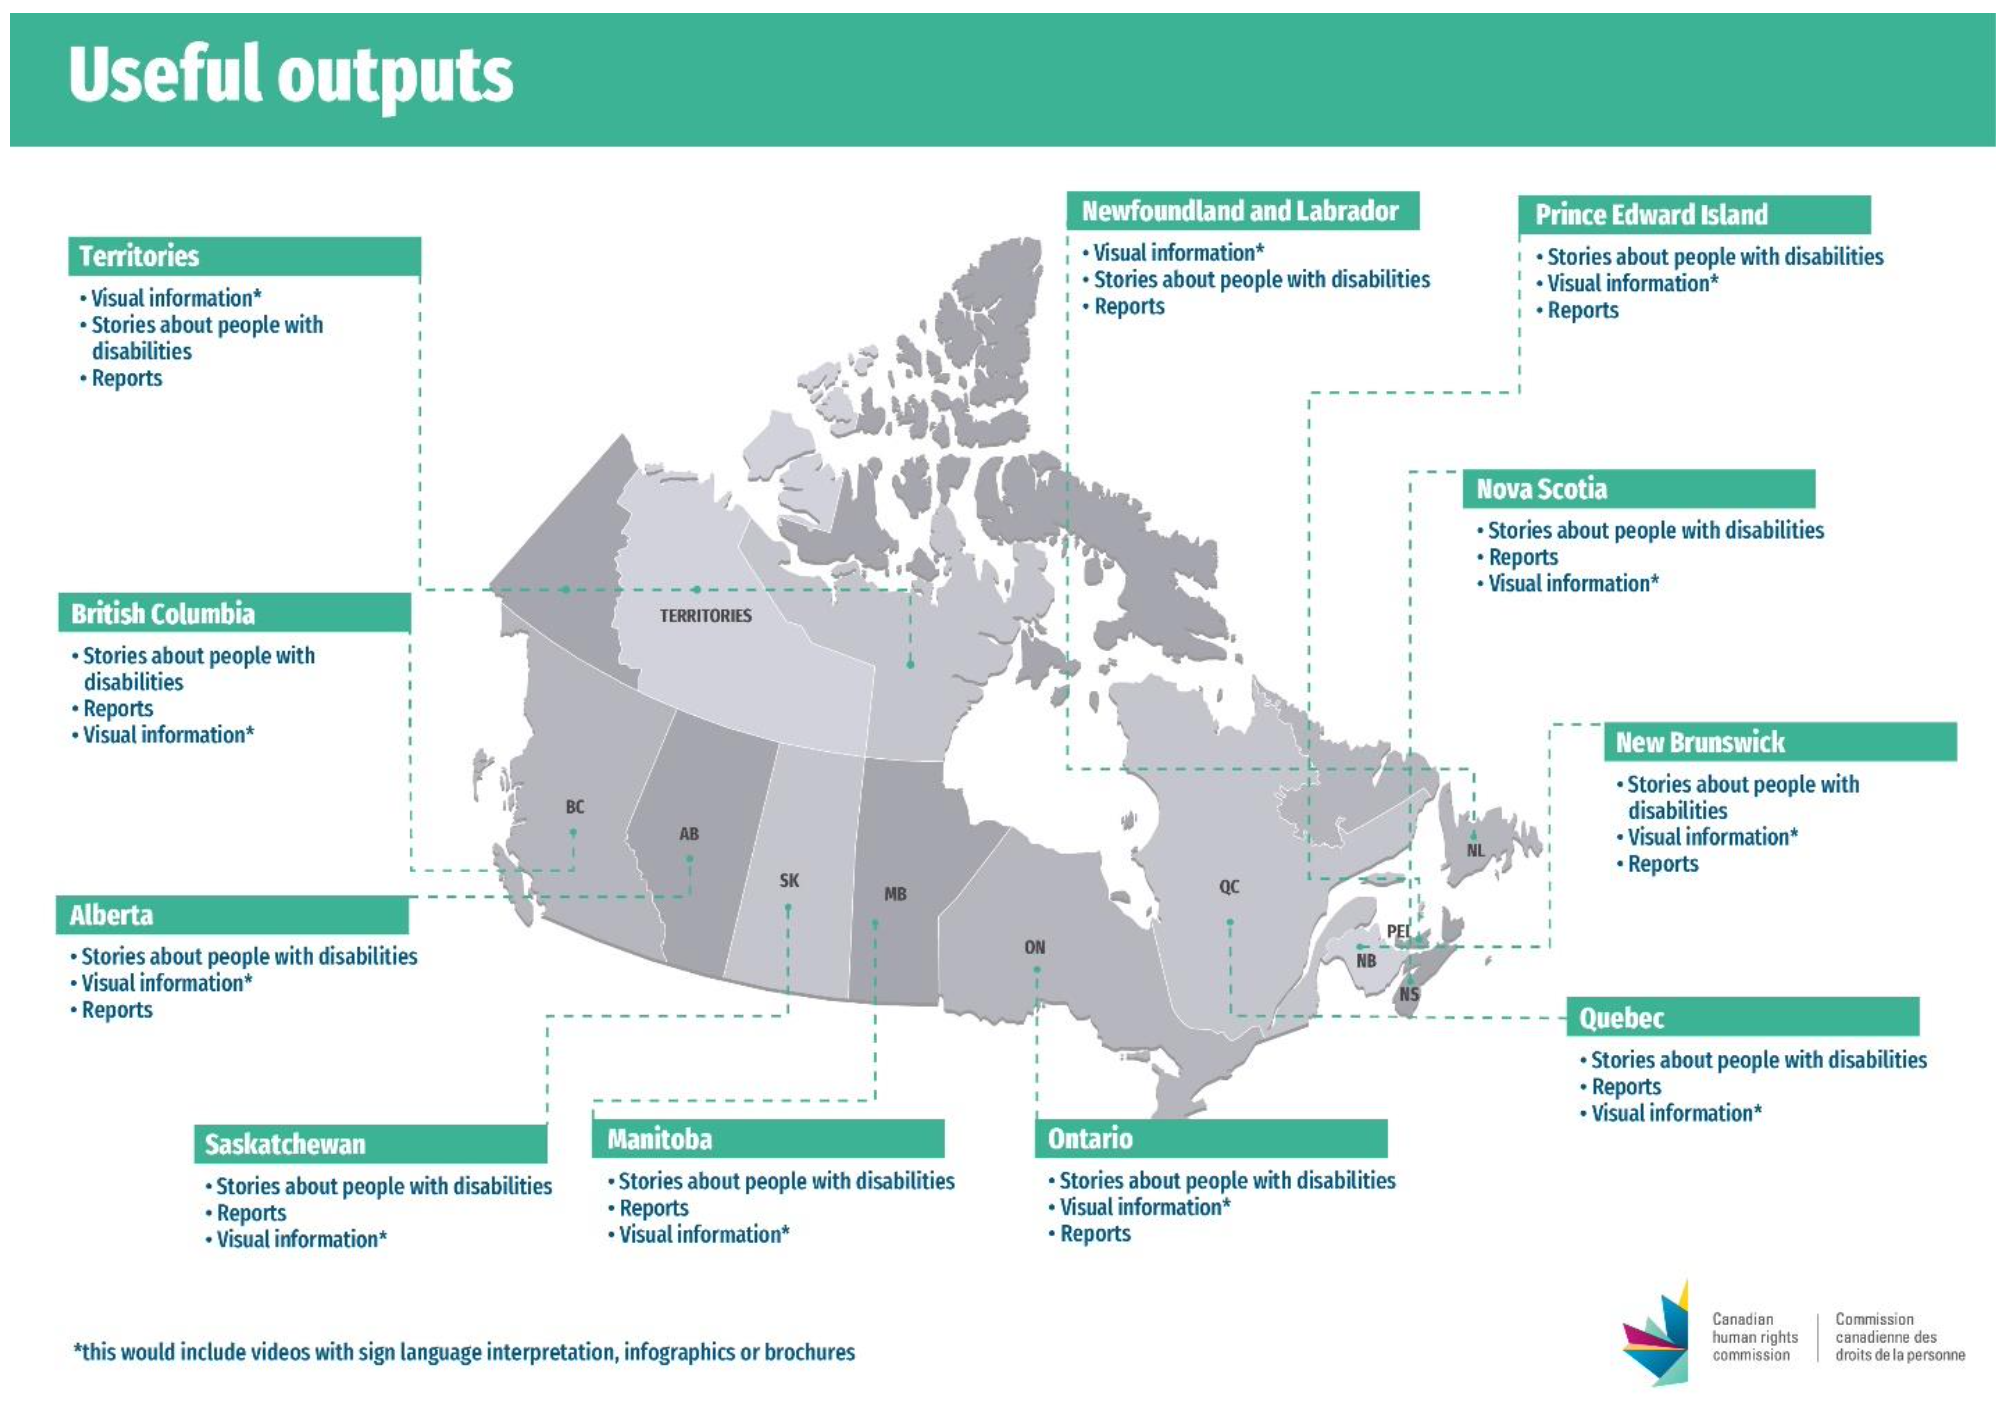 This is a geographical map graphic of Canada with the top useful outputs from monitoring work according to survey respondents, organized by region.